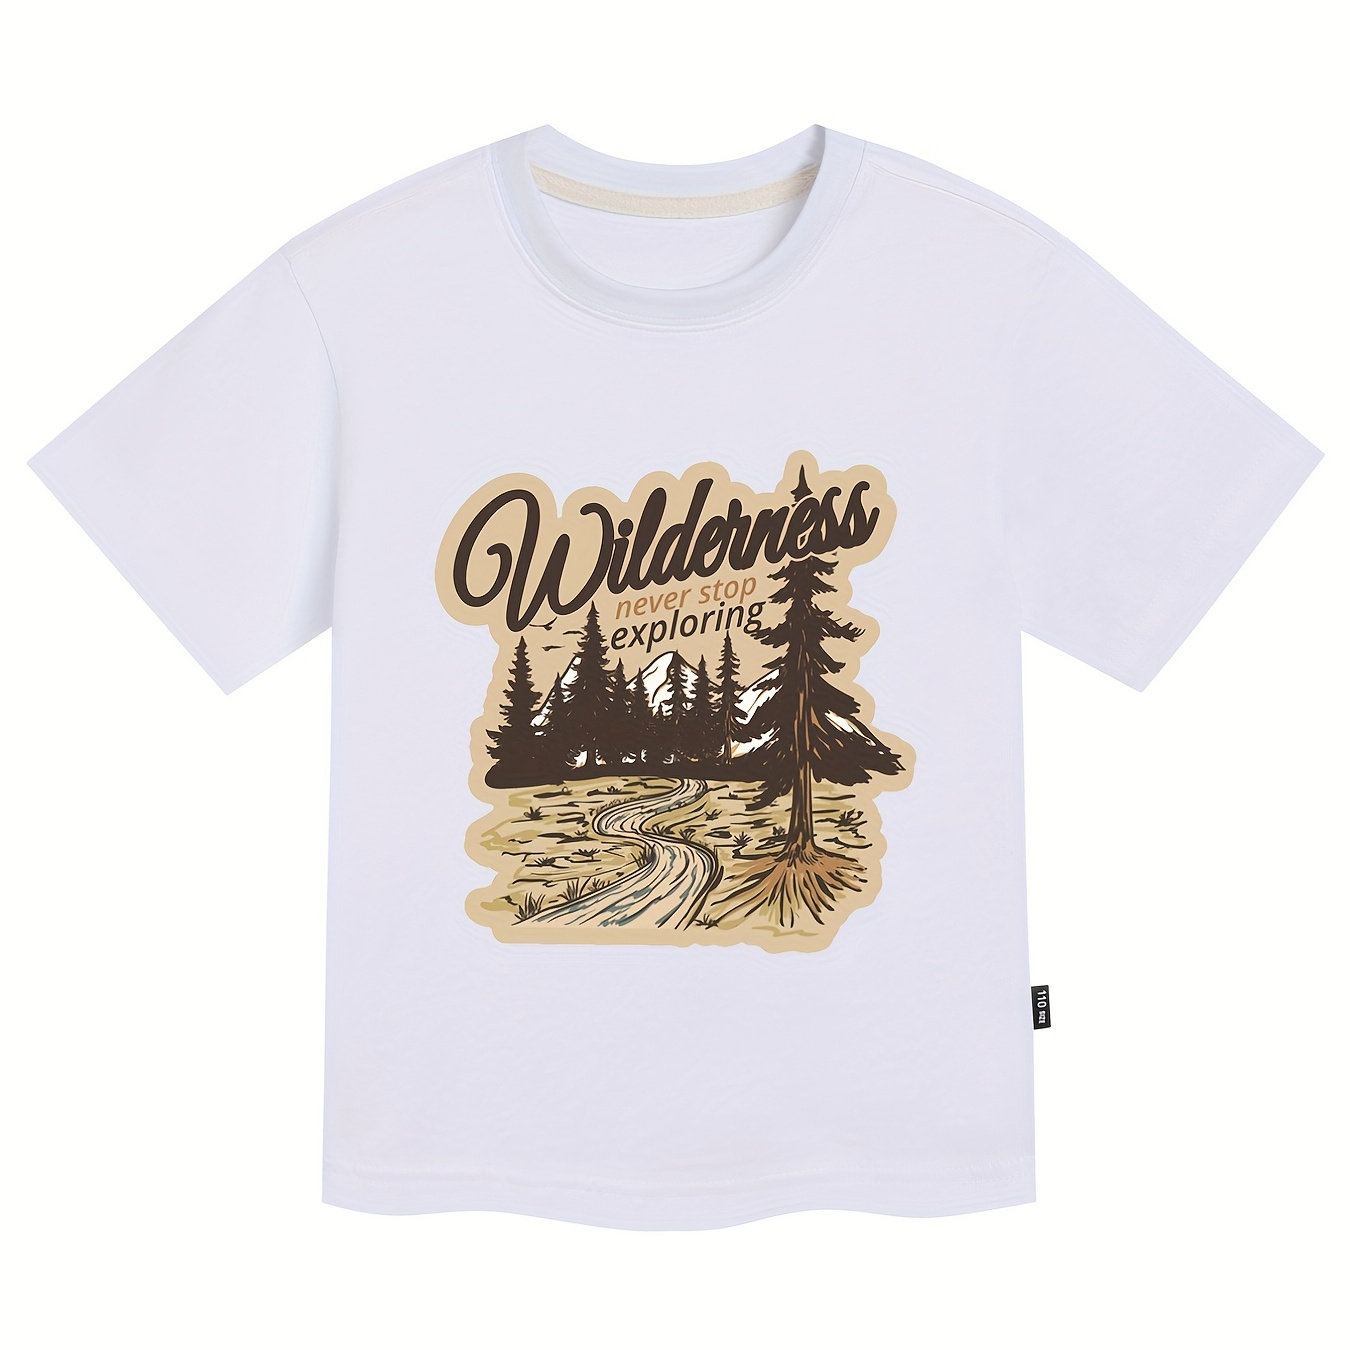 

Boys Casual T-shirt, Lightweight Comfy Short Sleeve Tops, Wilderness Graphic Tees For Unisex Toddlers Summer, Kids Clothings